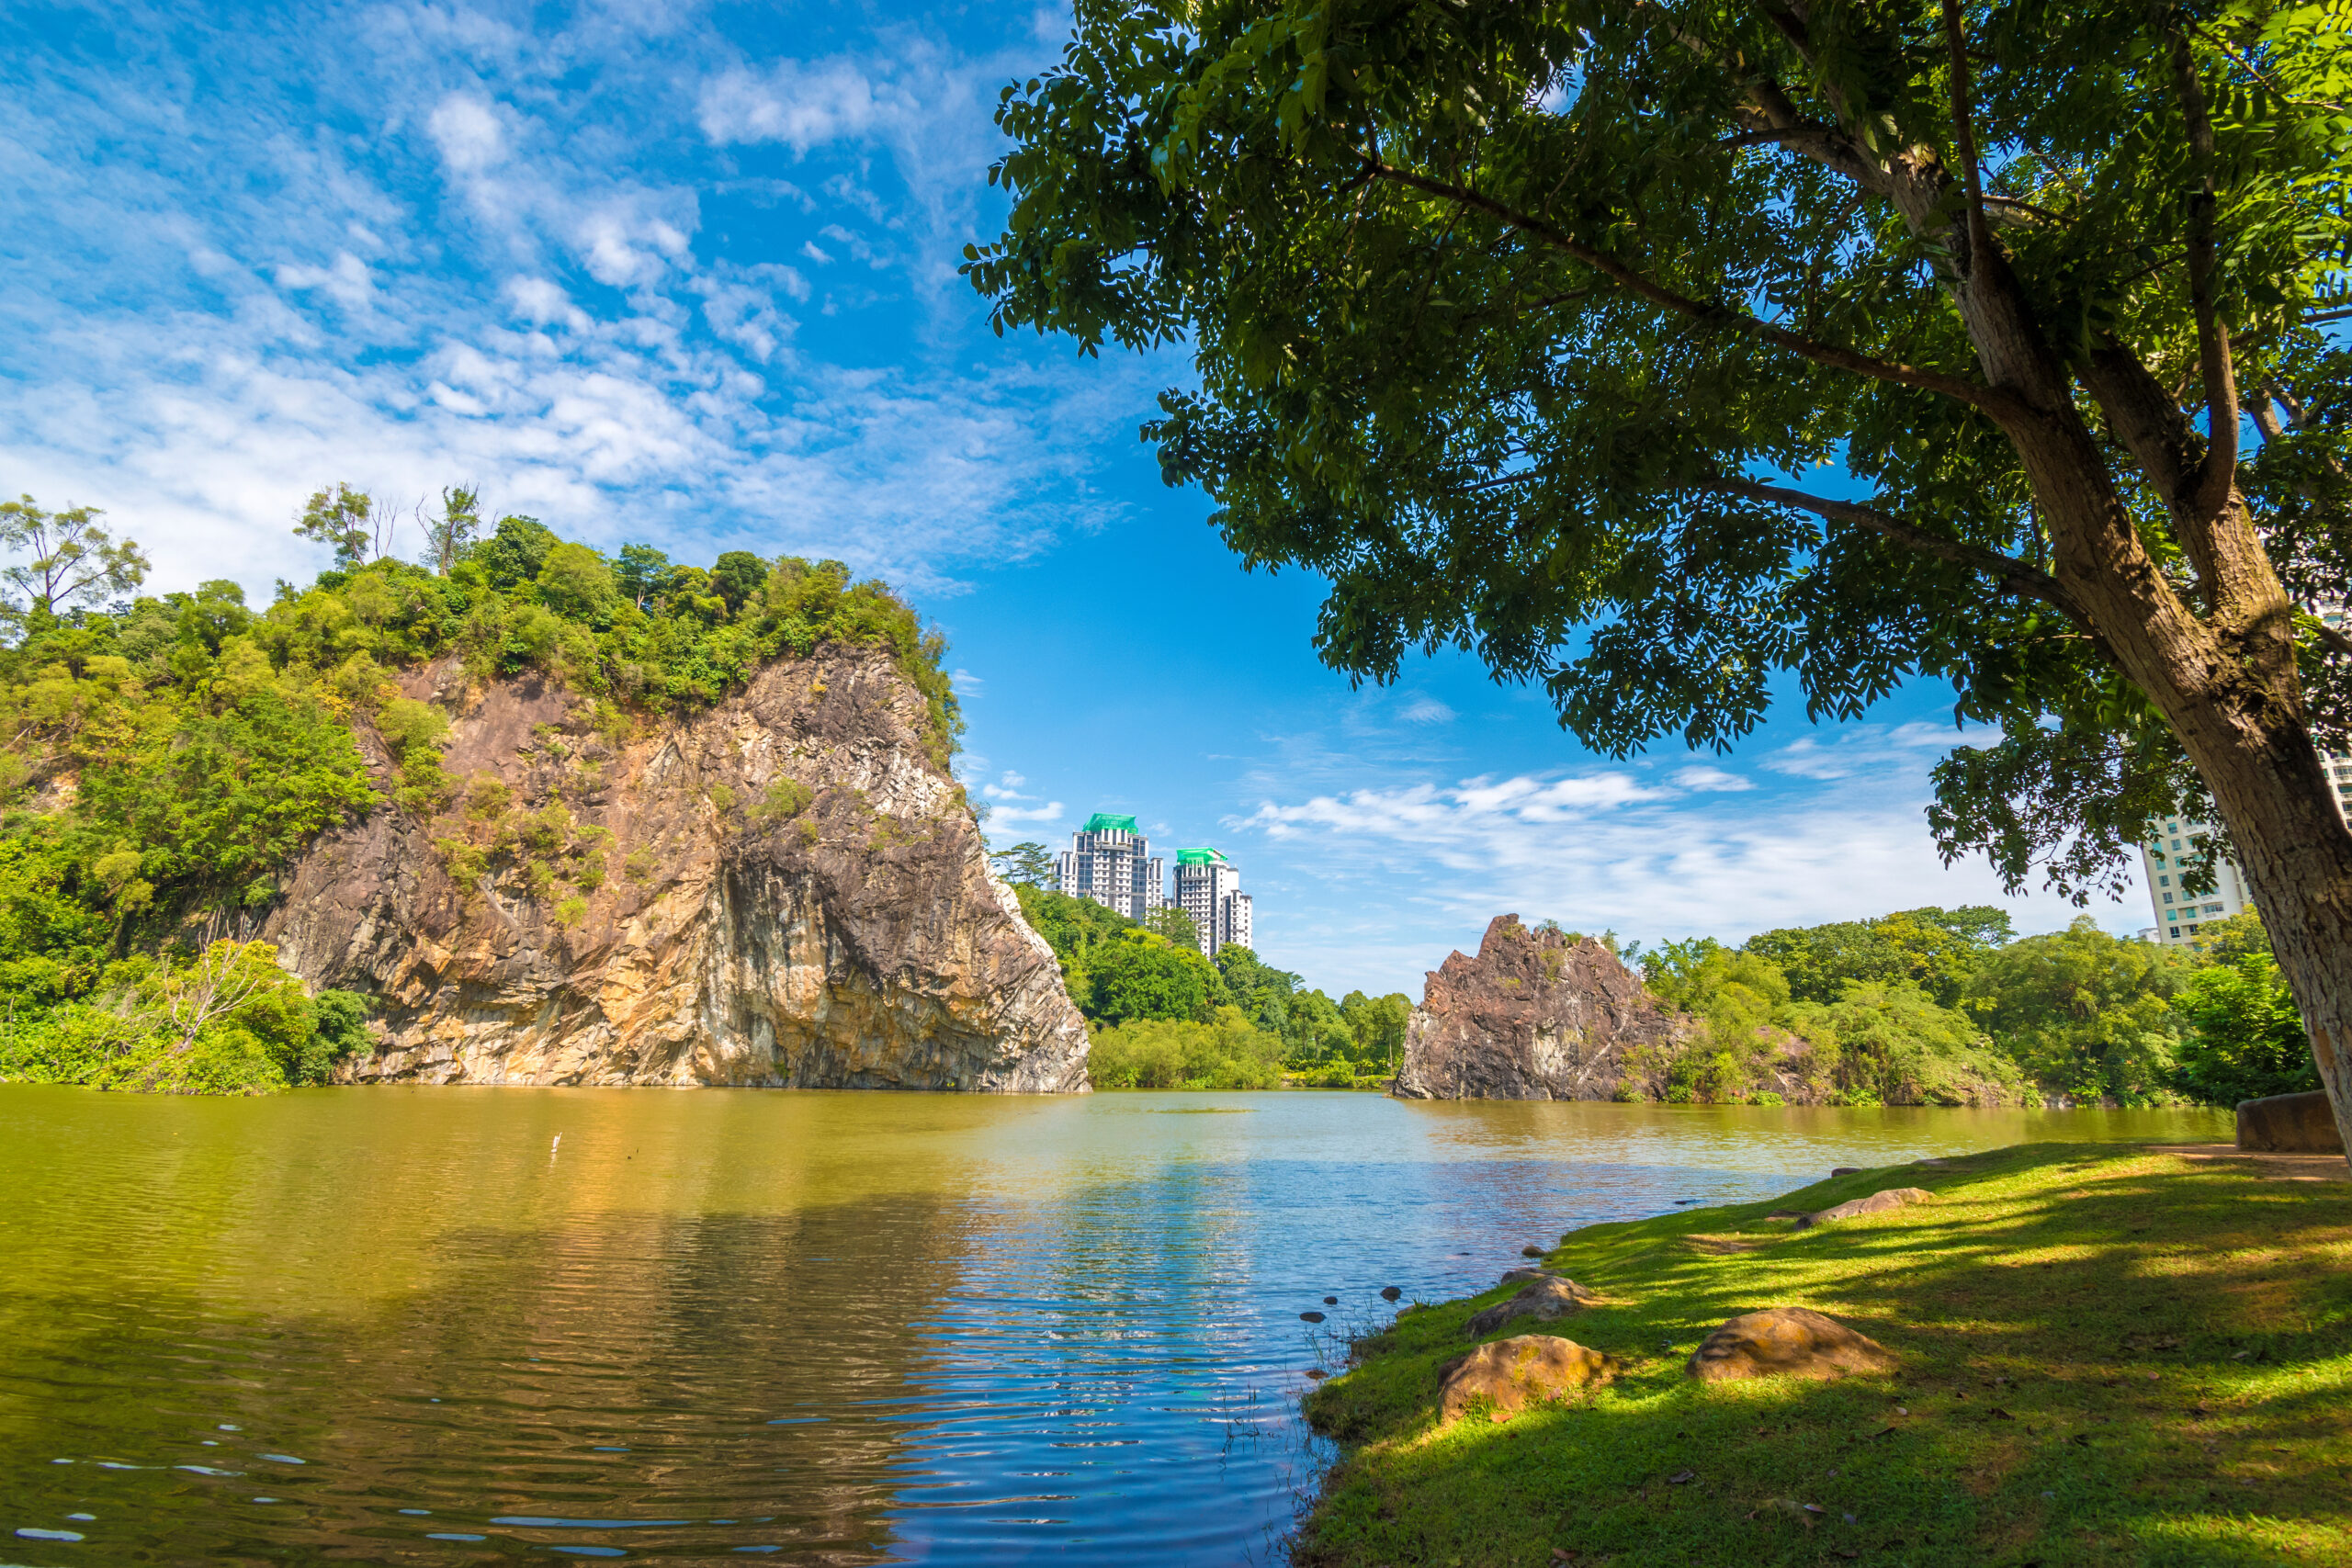 Beautiful, scenic view of the oasis at Little Guilin within Bukit Batok Town Park